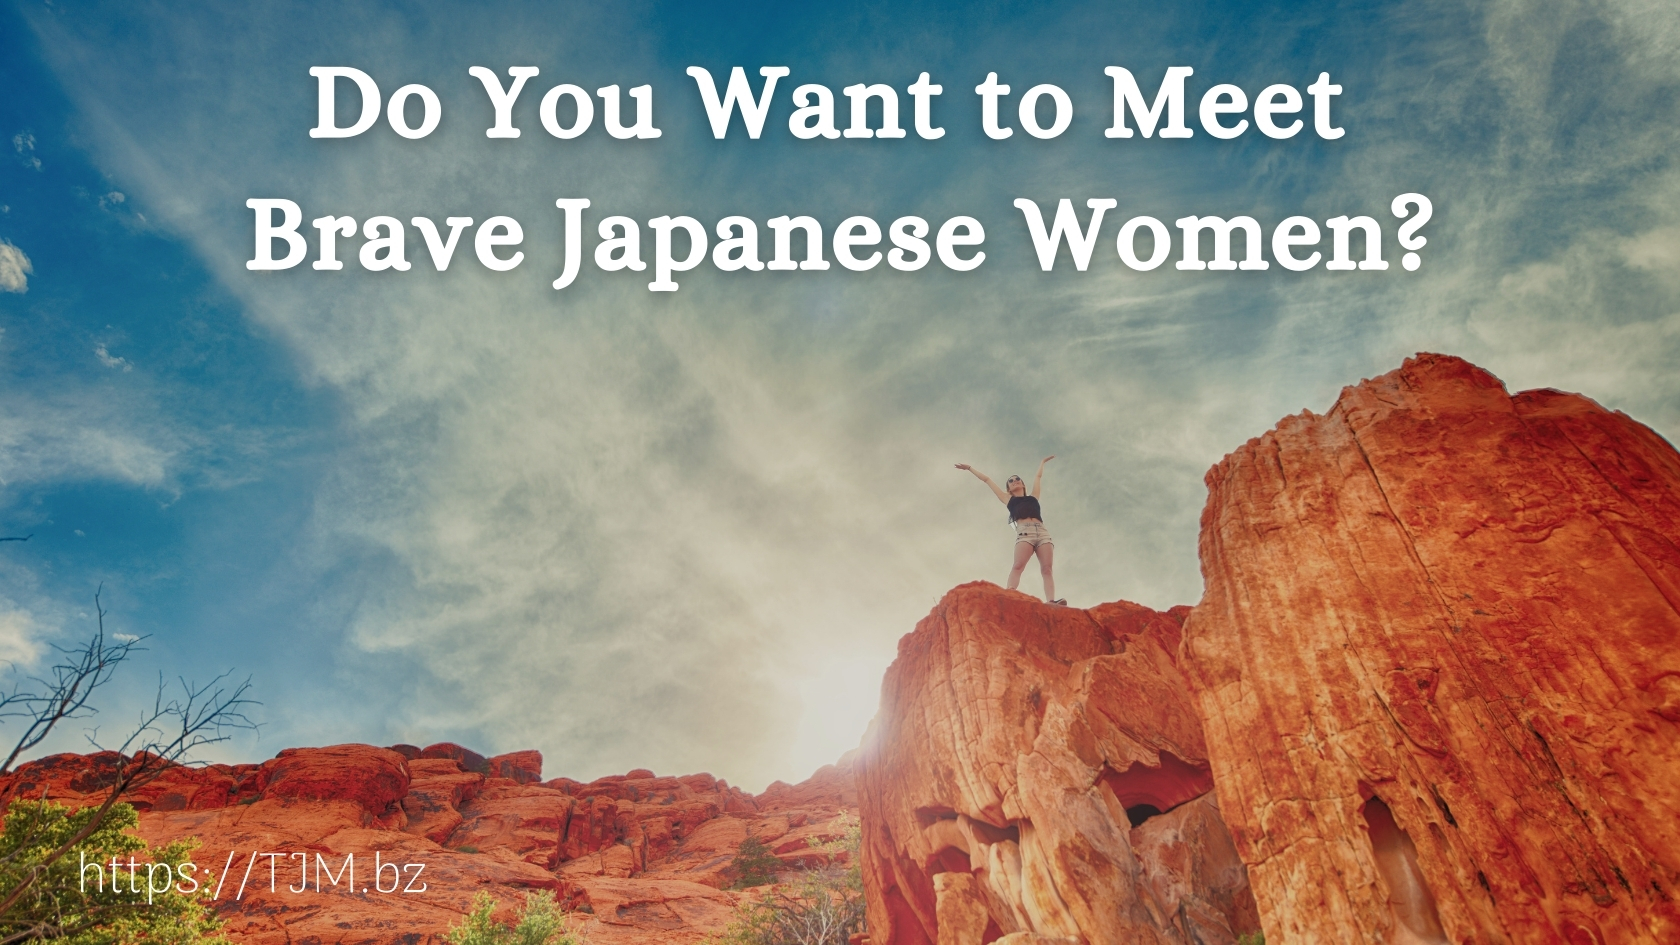 Do You Want to Meet Brave Japanese Women?